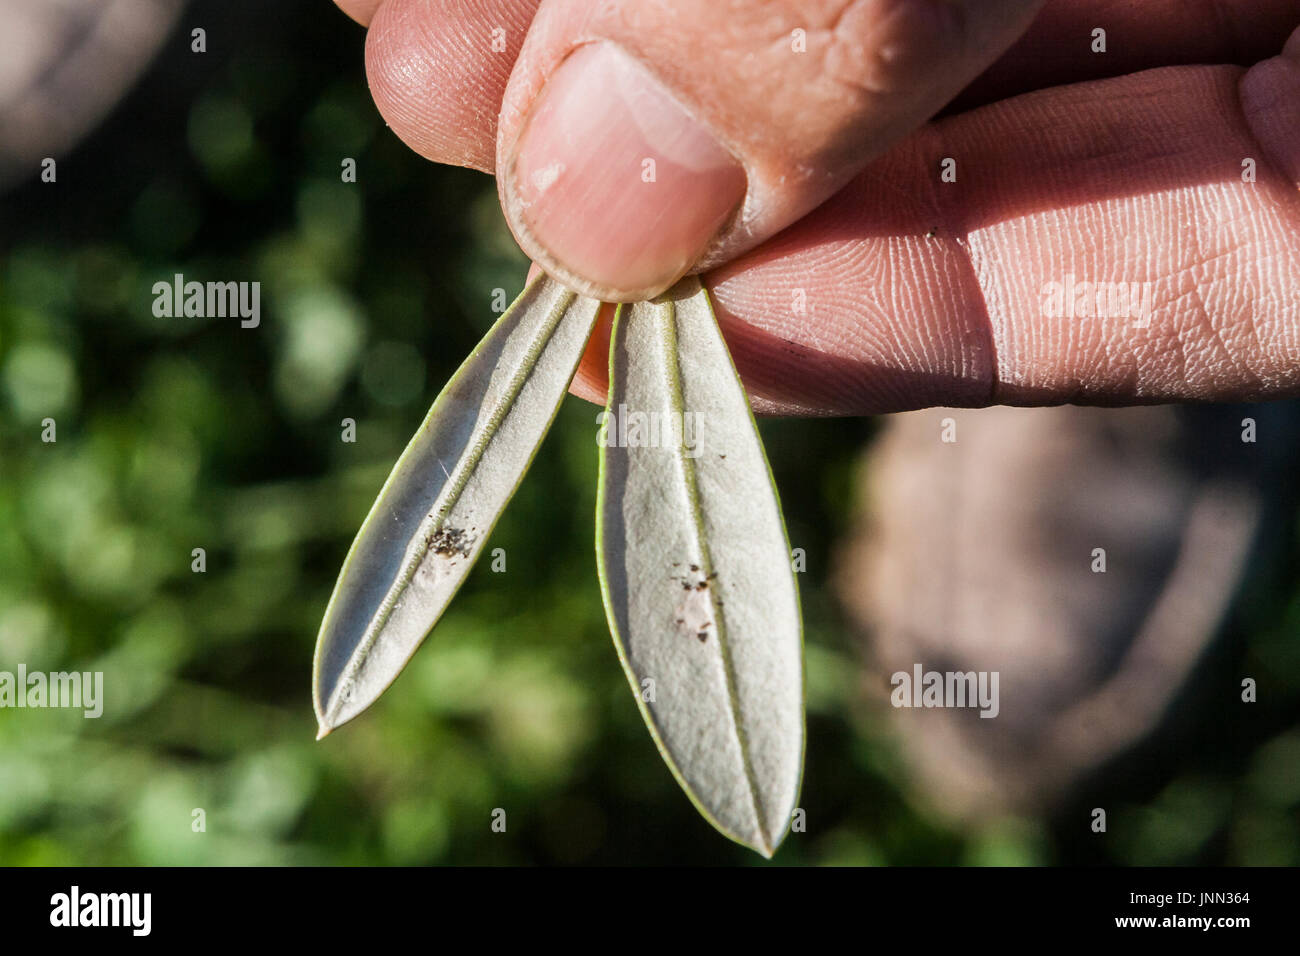 Farmer olive leaf in hand shows detail of infection call repilo, Jaen, Andalucia, Spain Stock Photo